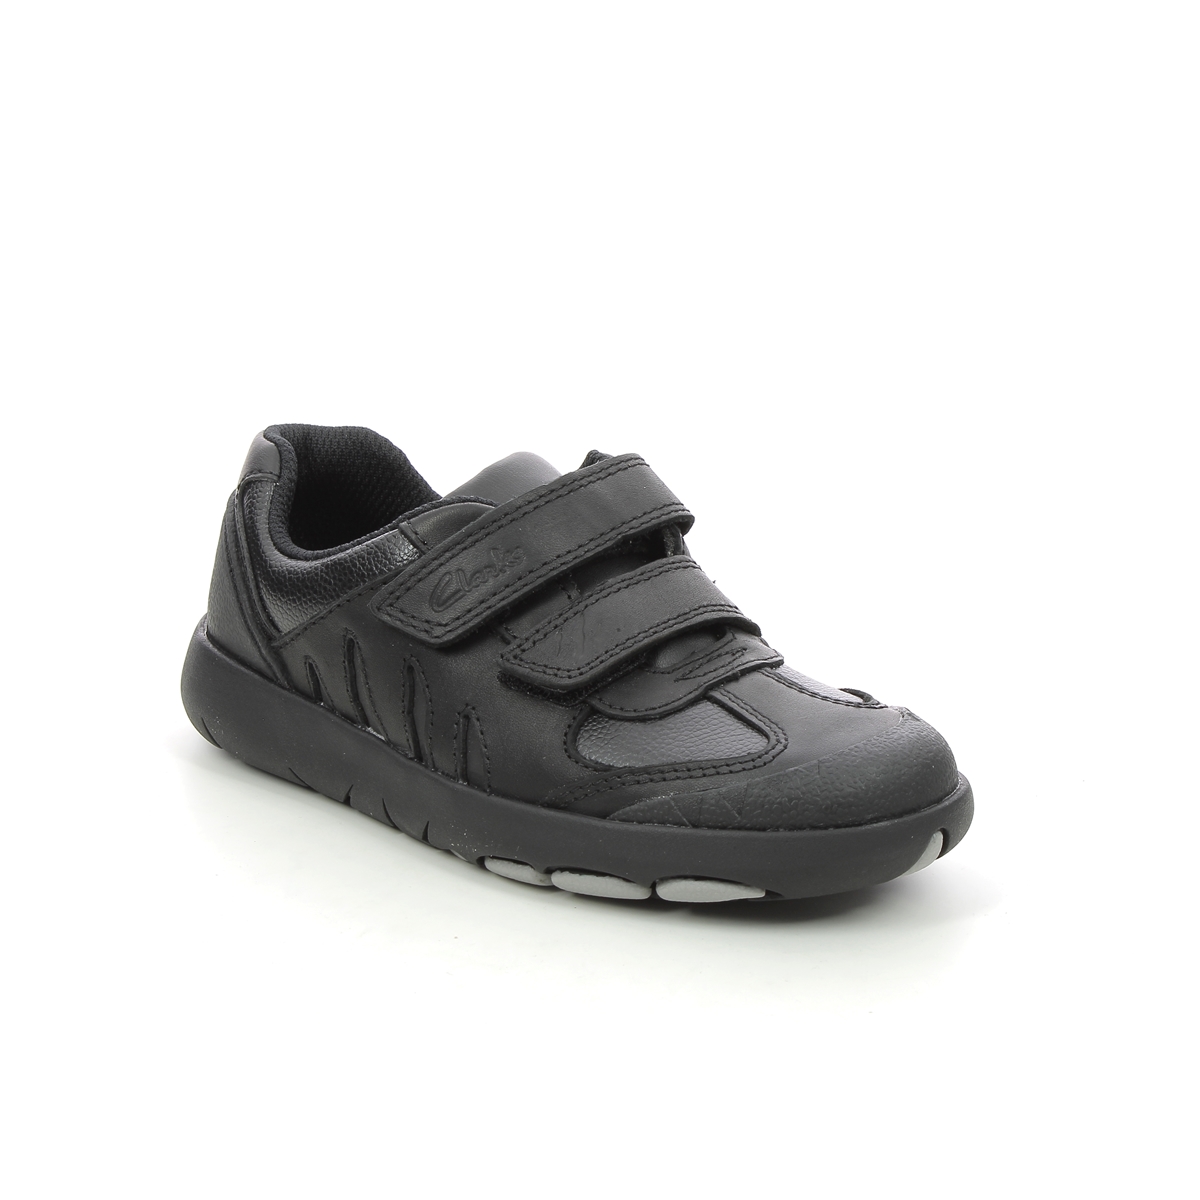 Clarks Rex Stride K Black leather Kids Boys Shoes 6269-87G in a Plain Leather in Size 2